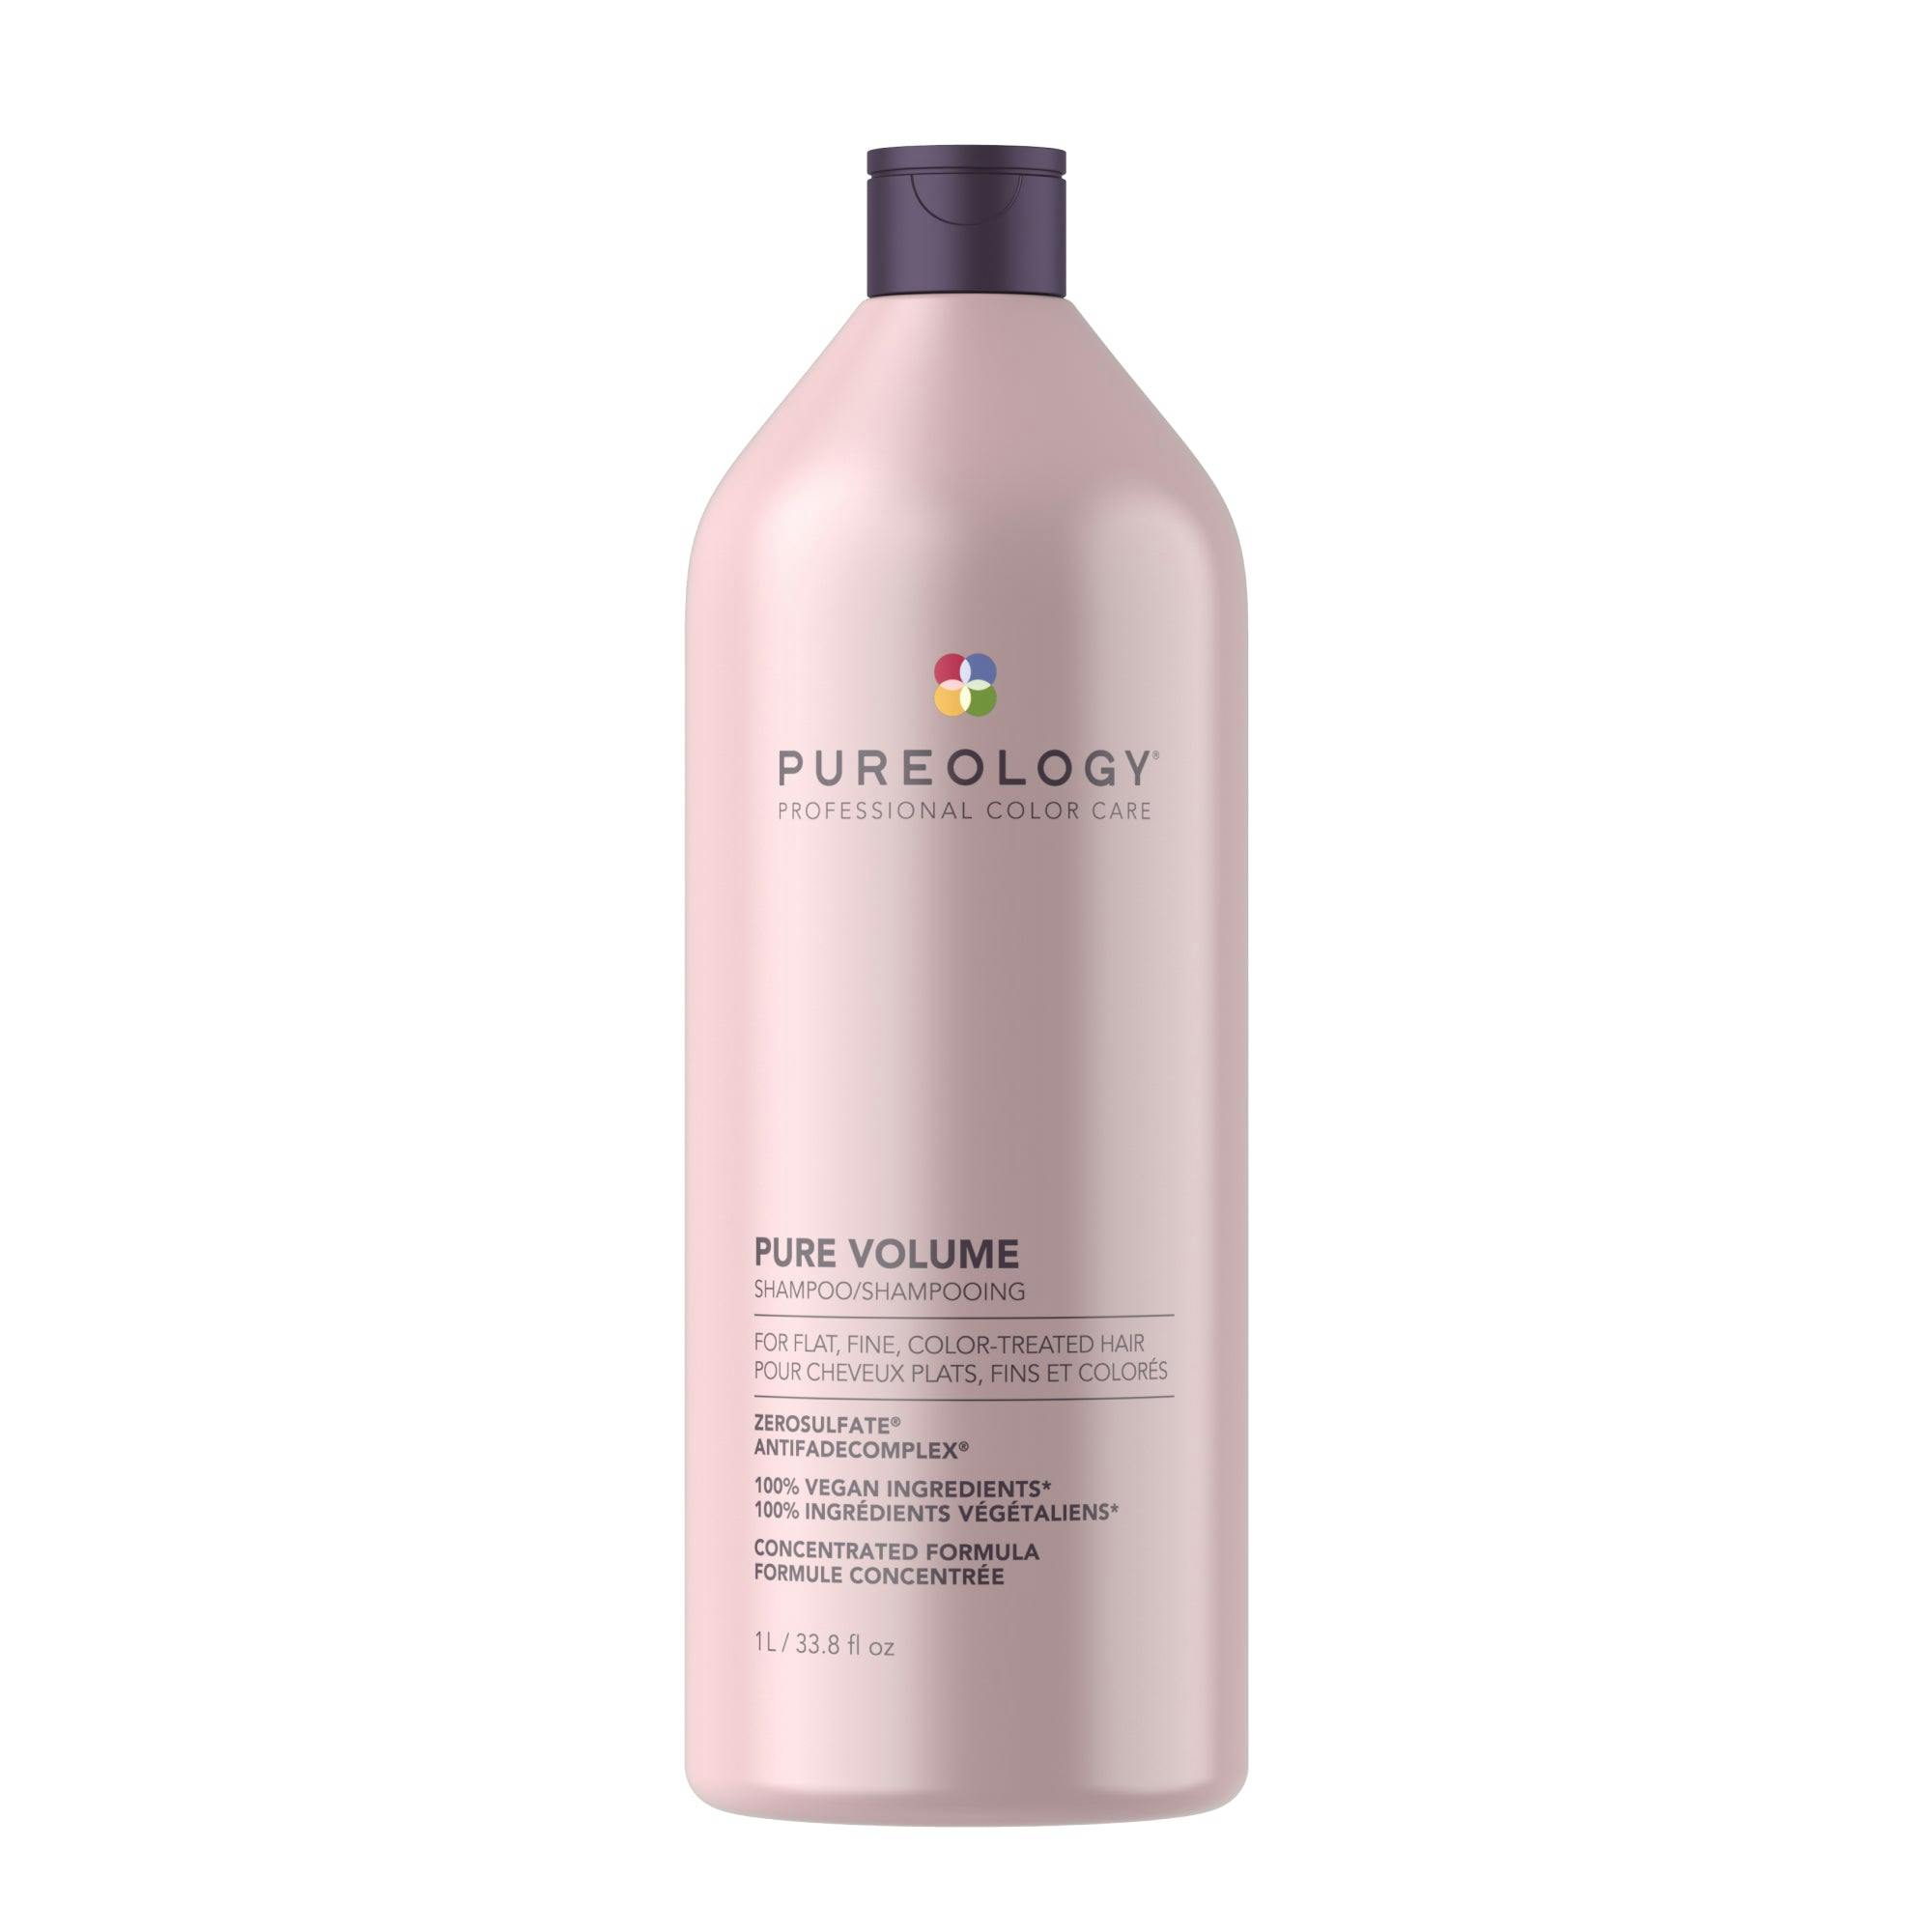 Pureology Smooth Perfection Shampoo 1000ml - FREE Delivery